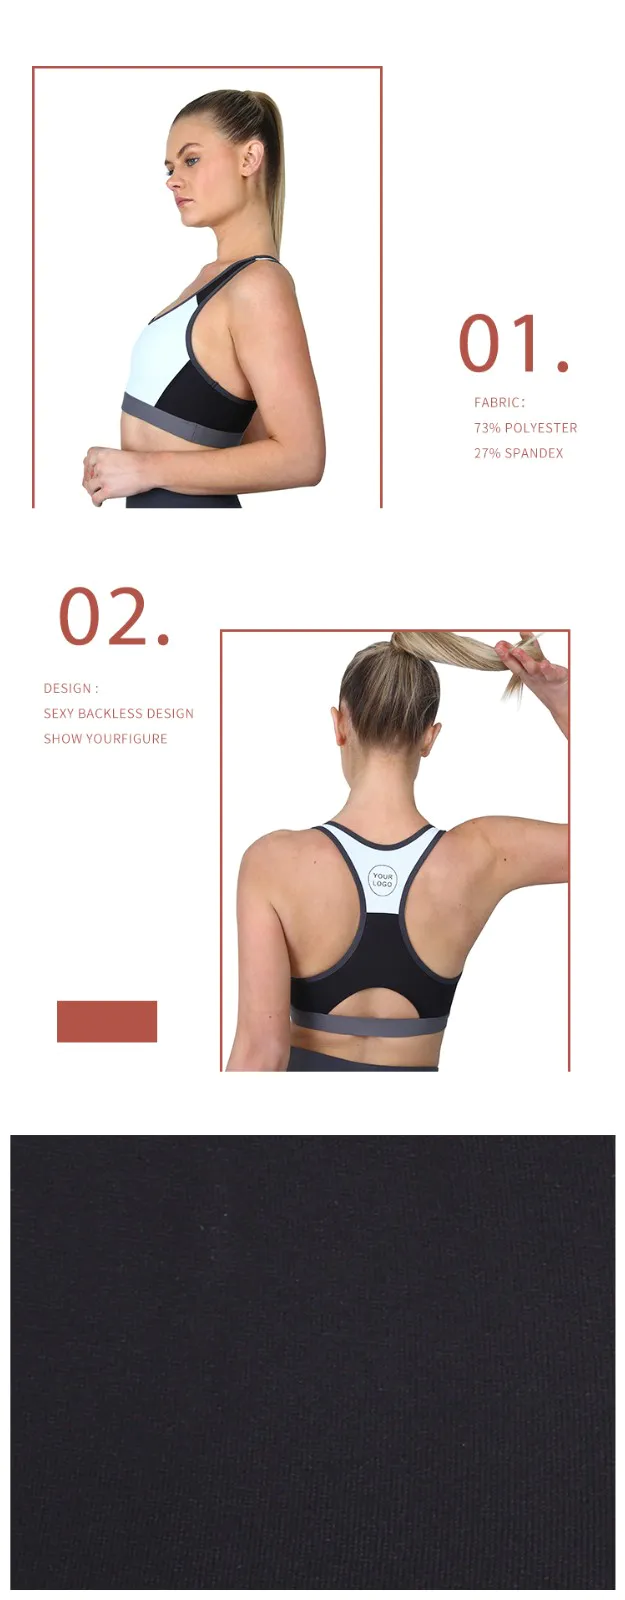 INGOR sexy online sports bra sale to enhance the capacity of sports at the gym